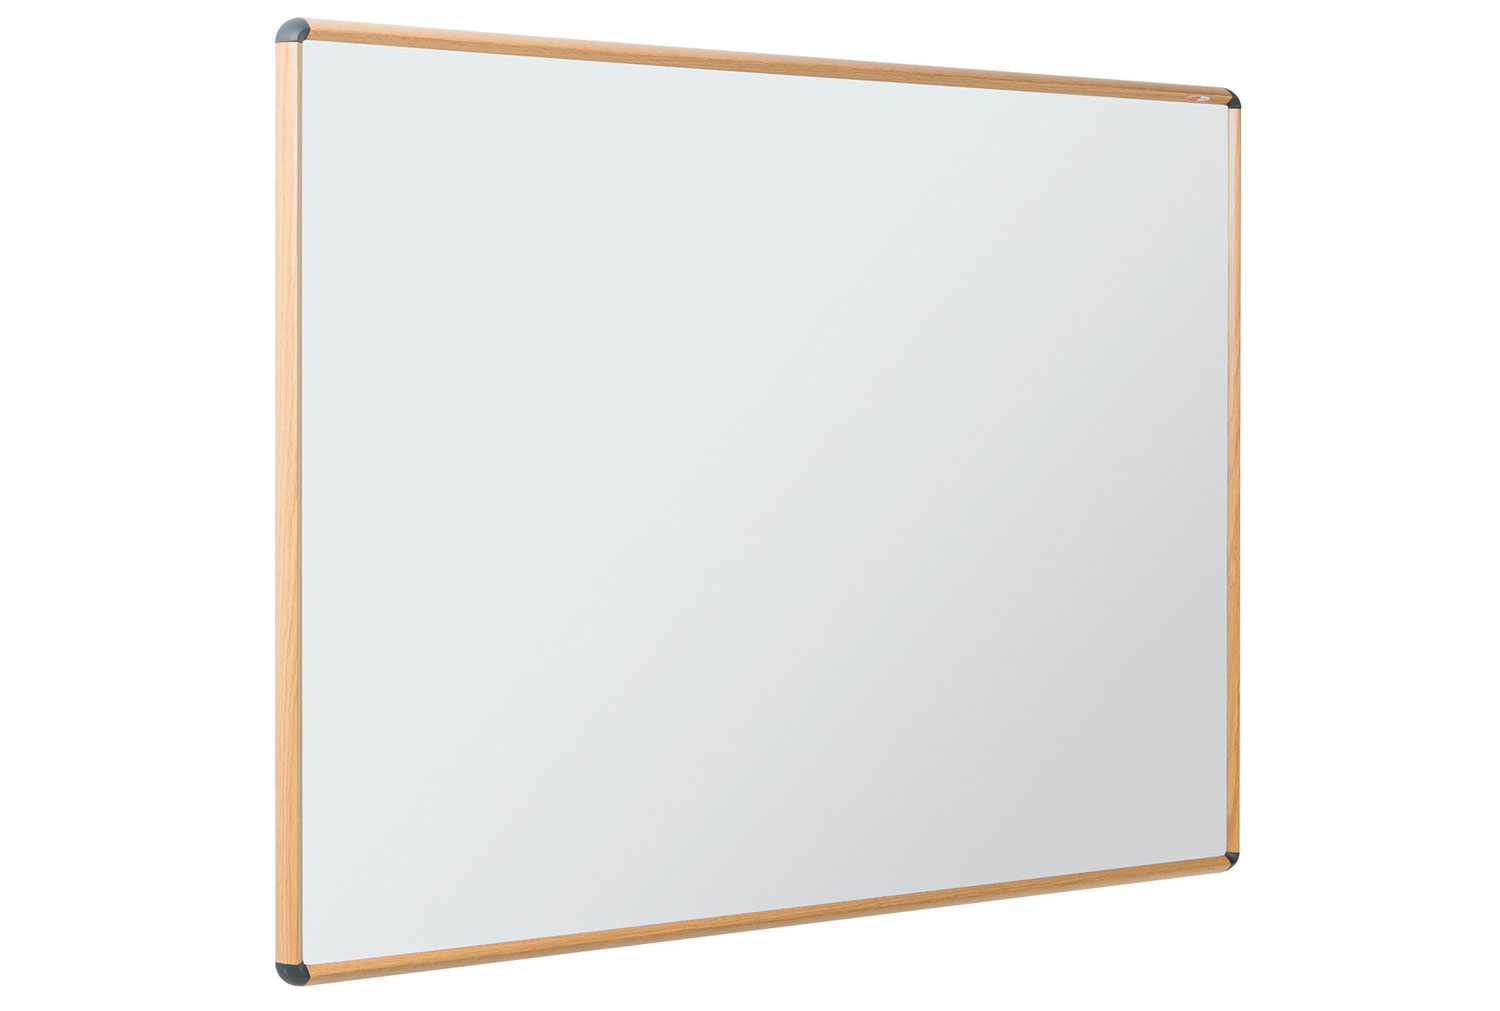 Shield Design Wood Effect Whiteboards, 150wx120h (cm)